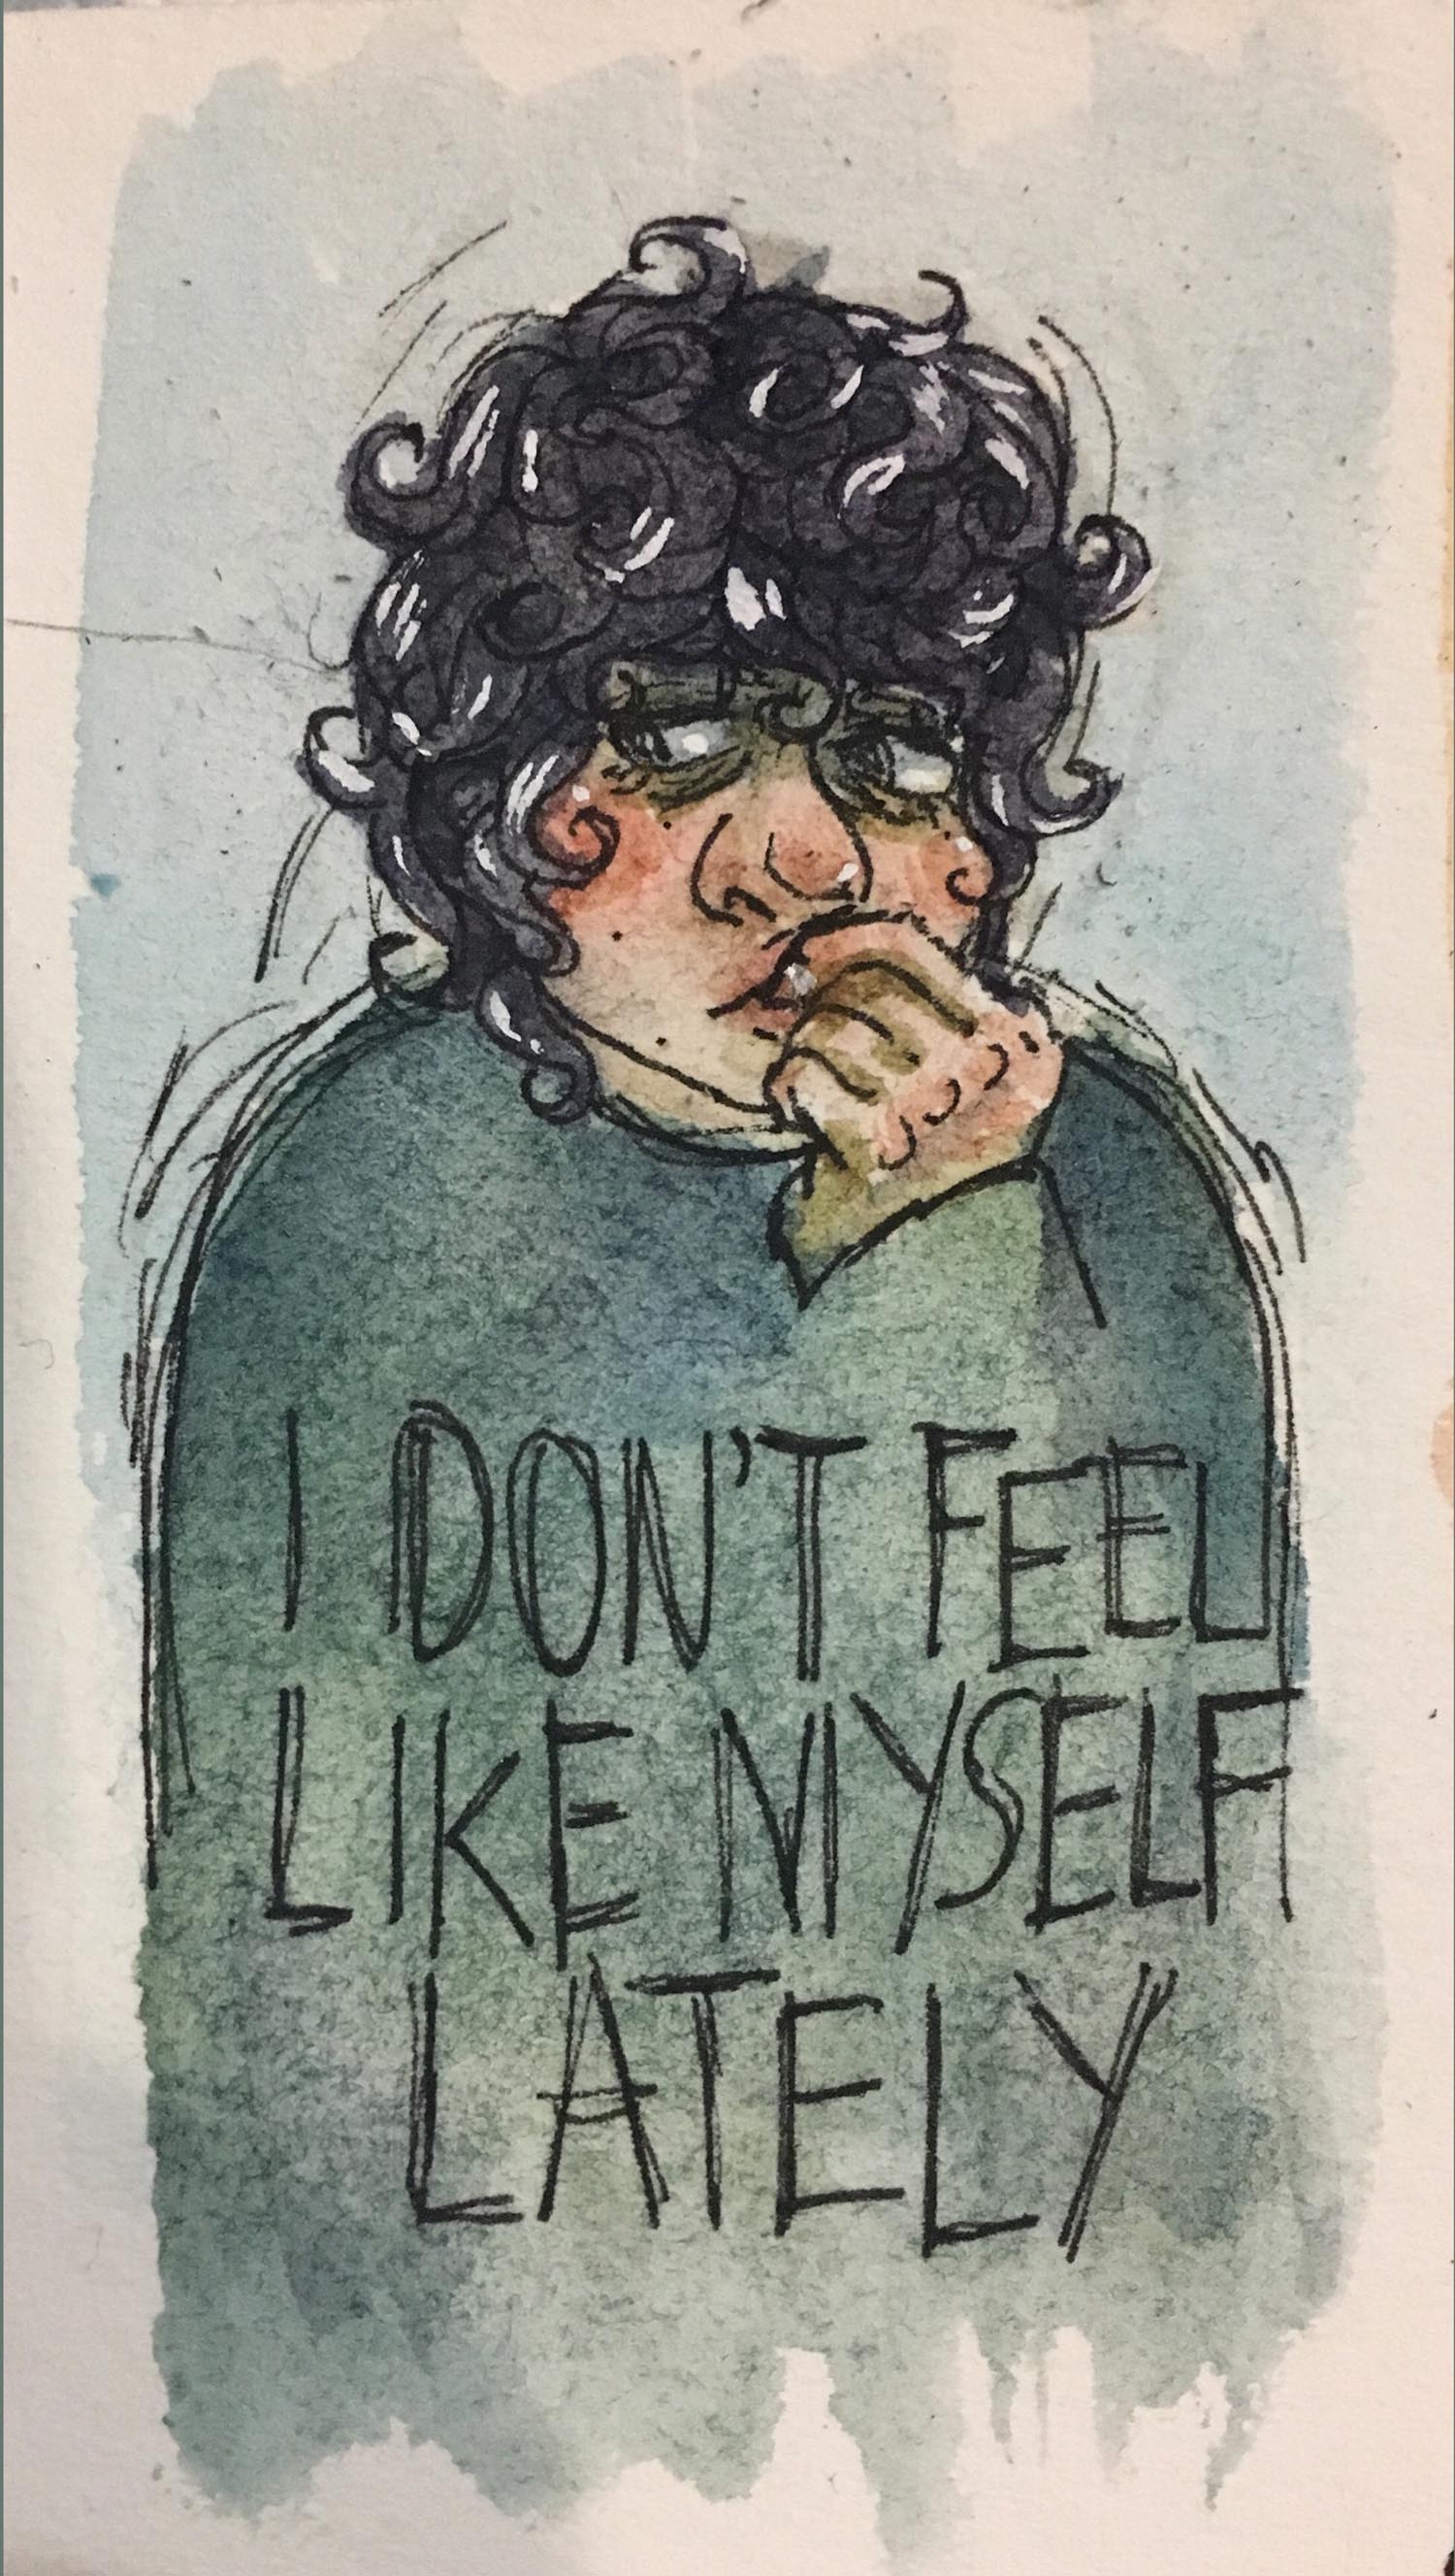 dark, curly haired figure (teddy) biting their nails with title text below